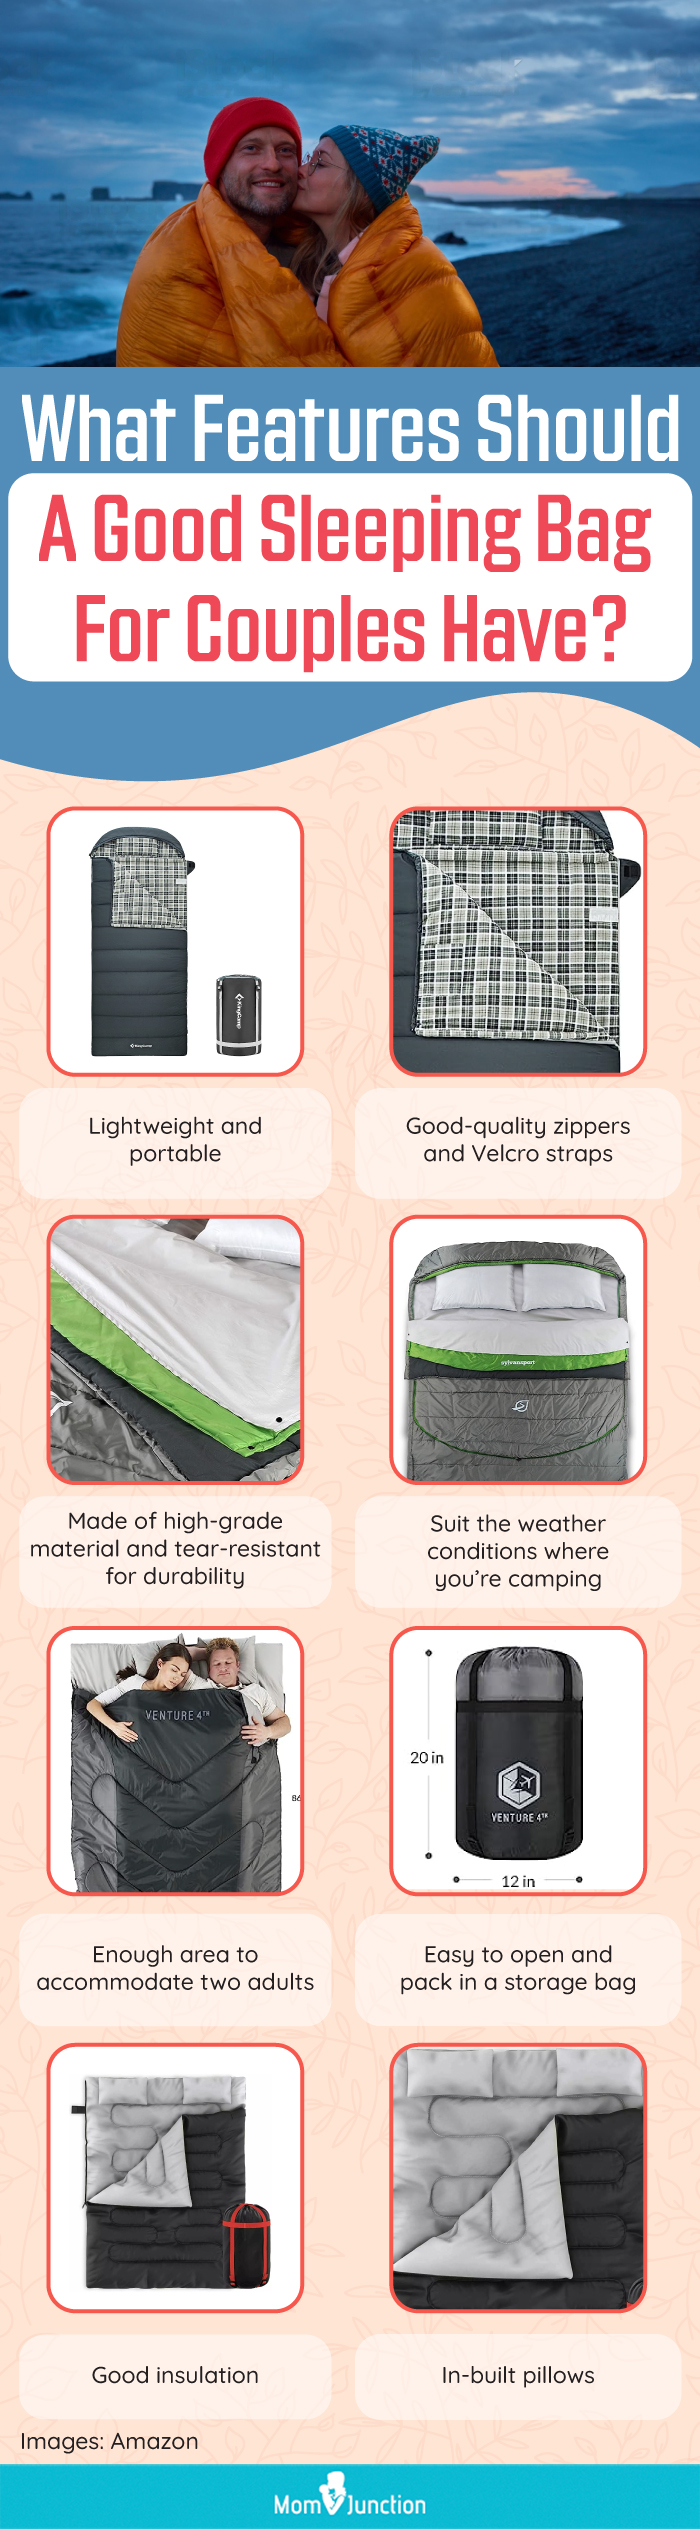 What Features Should A Good Sleeping Bag For Couples Have (infographic)